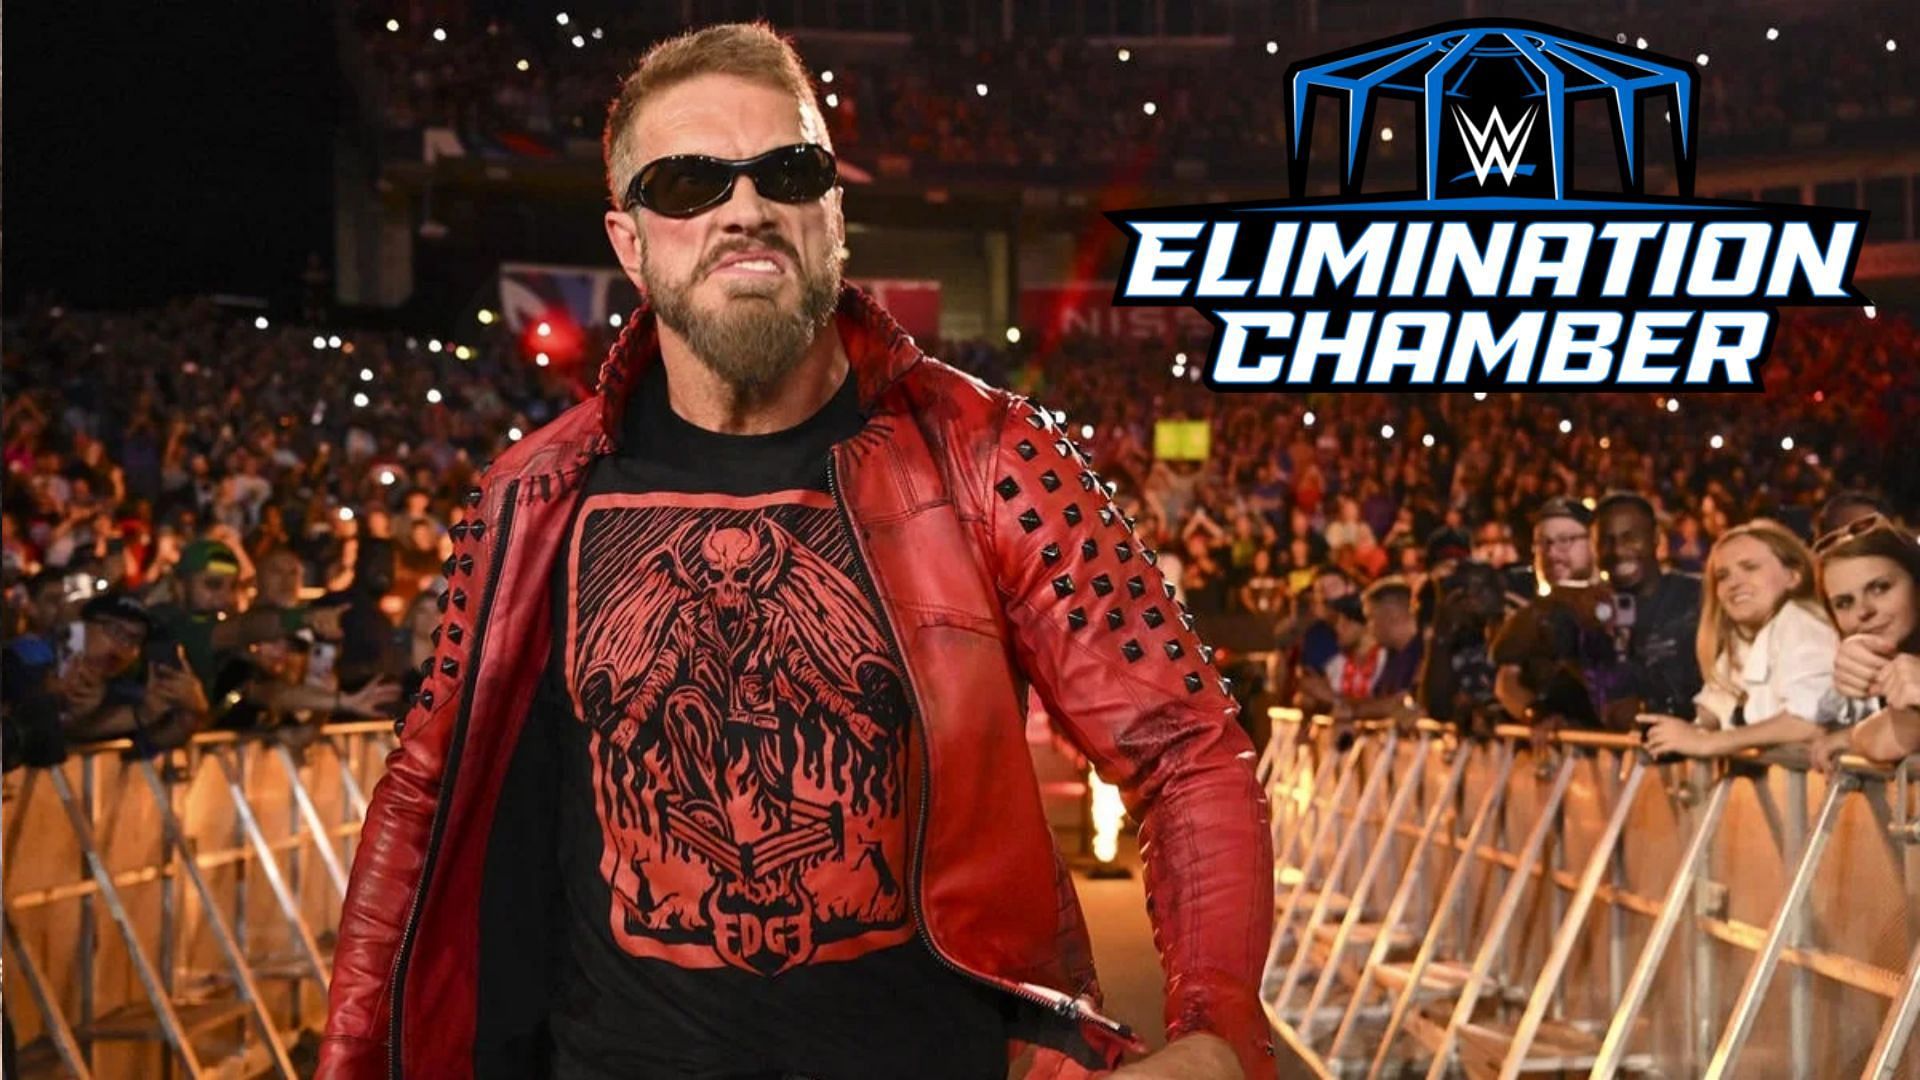 Could this star have helped Edge prepare for The Elimination Chamber?